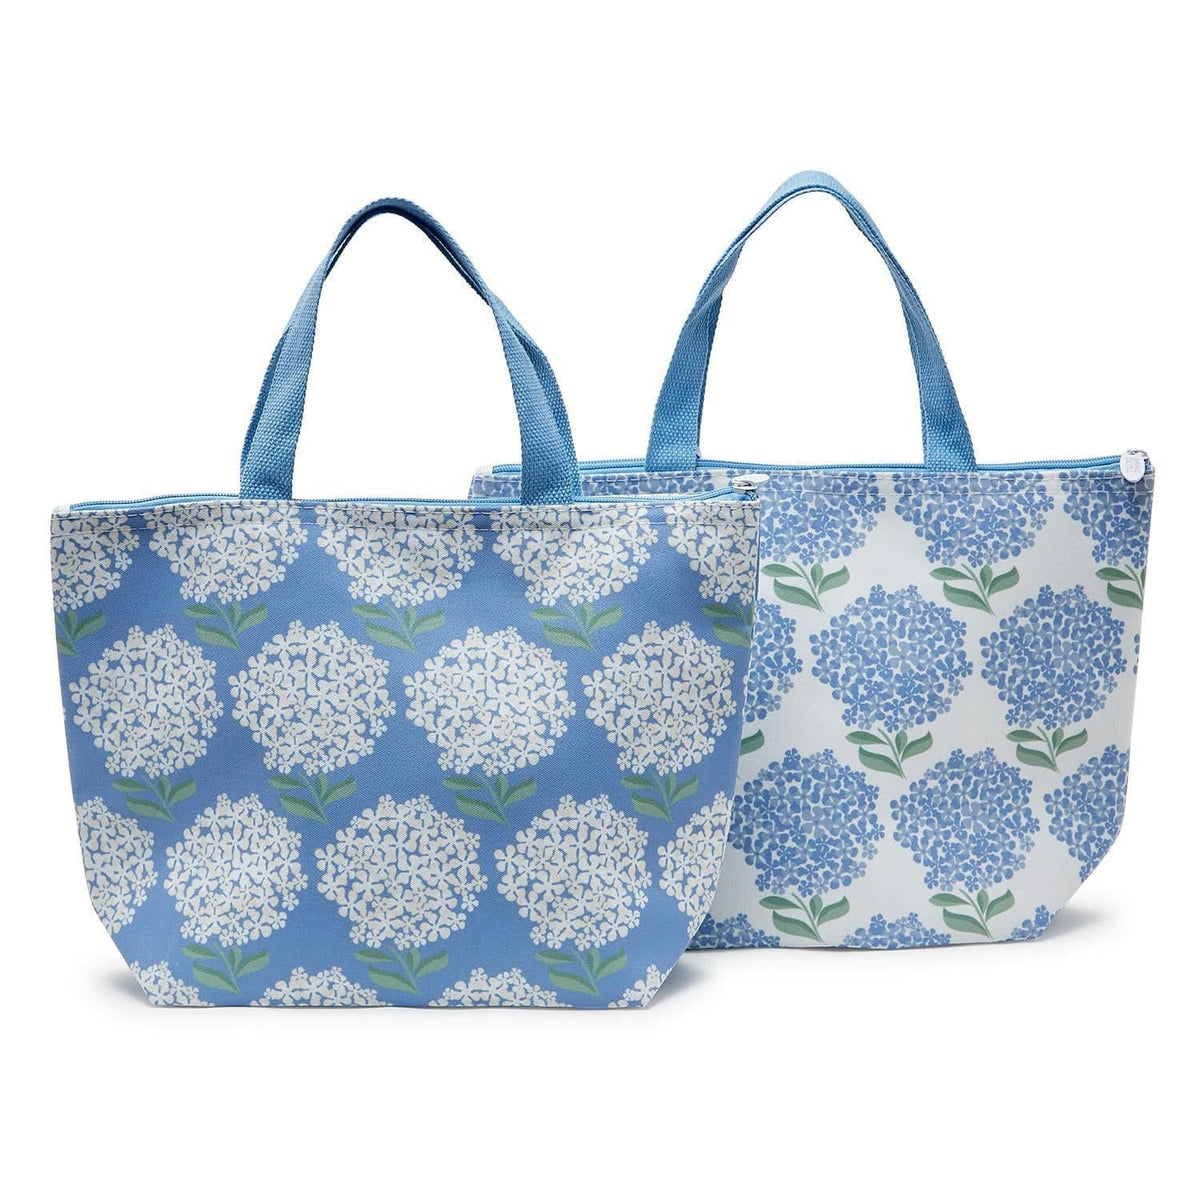 Hydrangea Thermal Lunch Tote - The Preppy Bunny